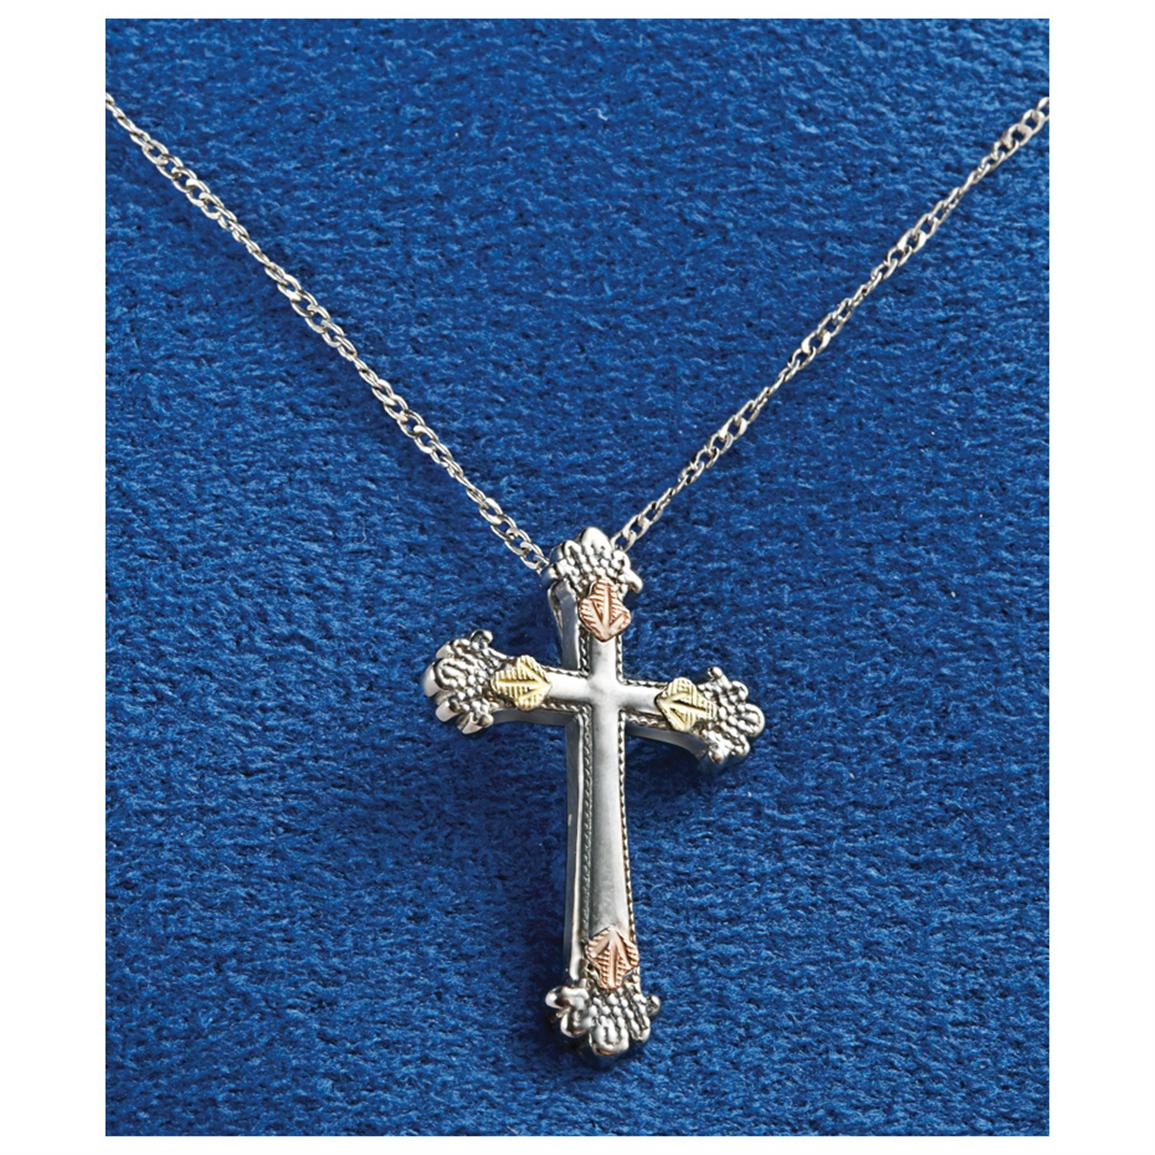 Black Hills Gold Sterling Cross Necklace - 421192, Jewelry at Sportsman